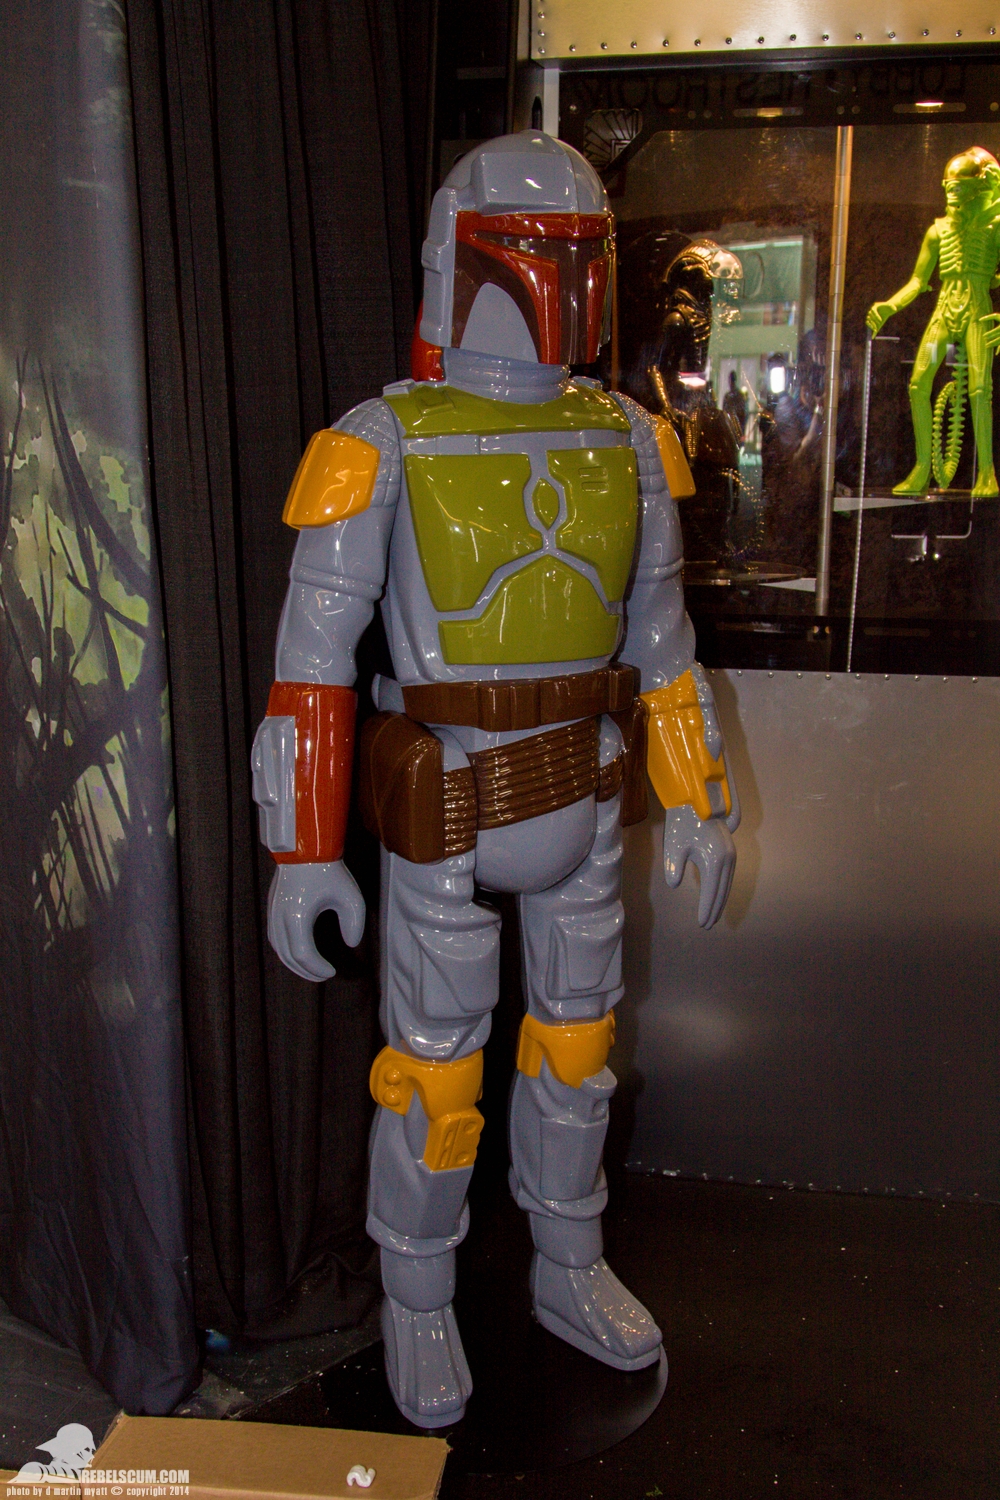 SDCC-2014-Gentle-Giant-Life-Size-Kenner-Boba-Fett-First-Look-002.jpg